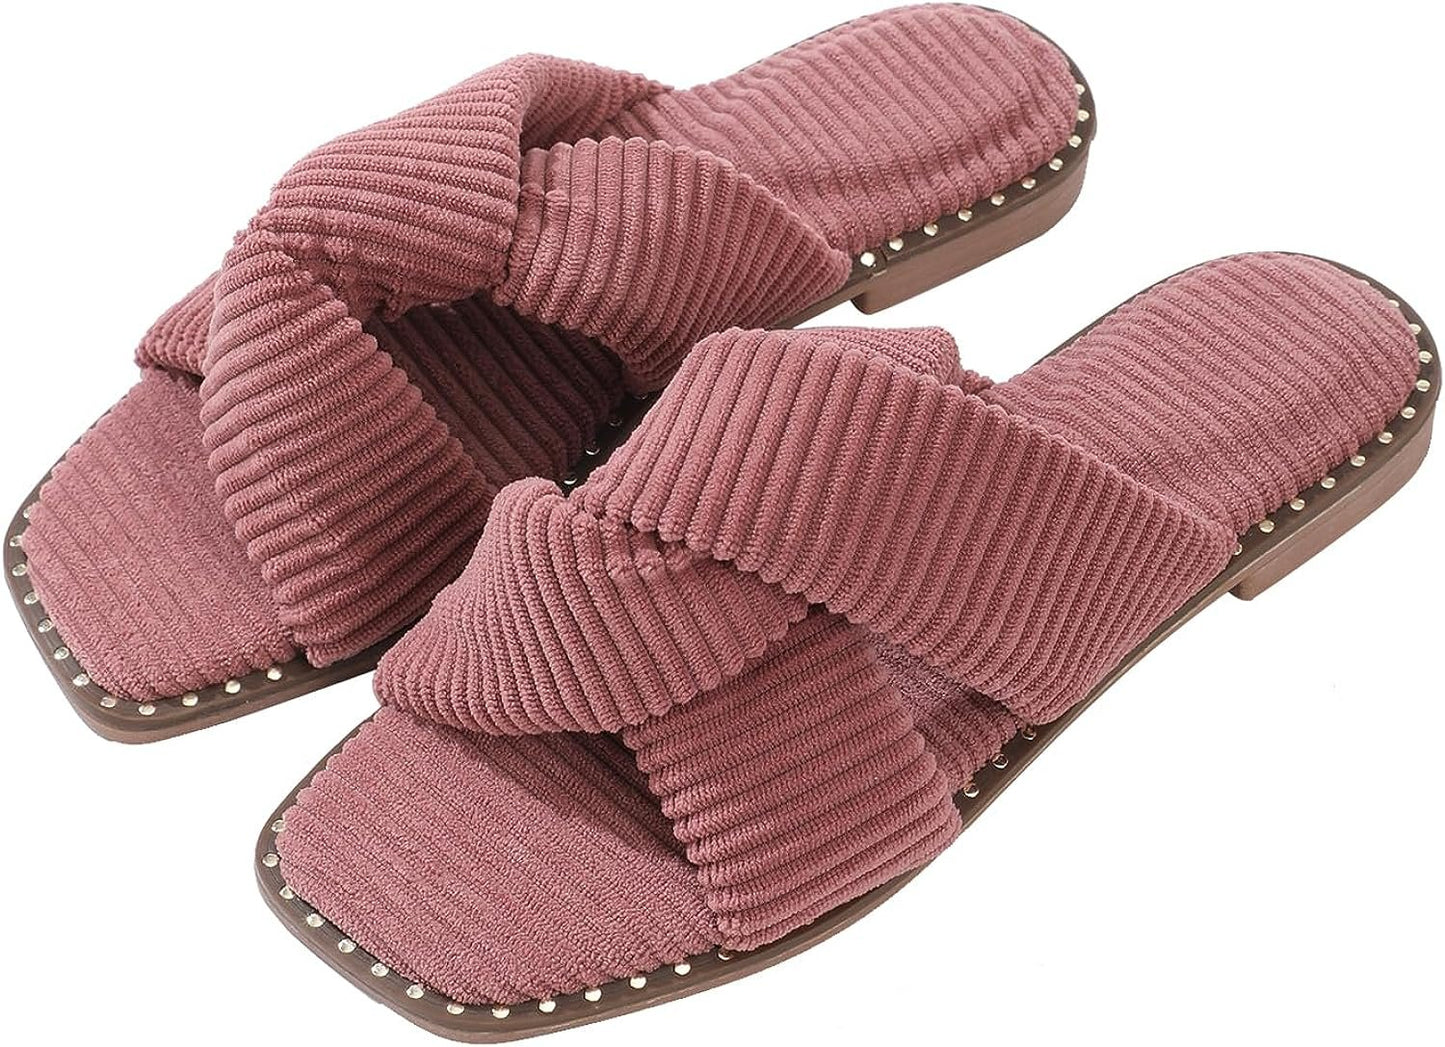 Roxoni Velvet Piping Flat Sandals for Women - Stylish Studs Around Outsole, Dressy Footwear for Summer Ideal